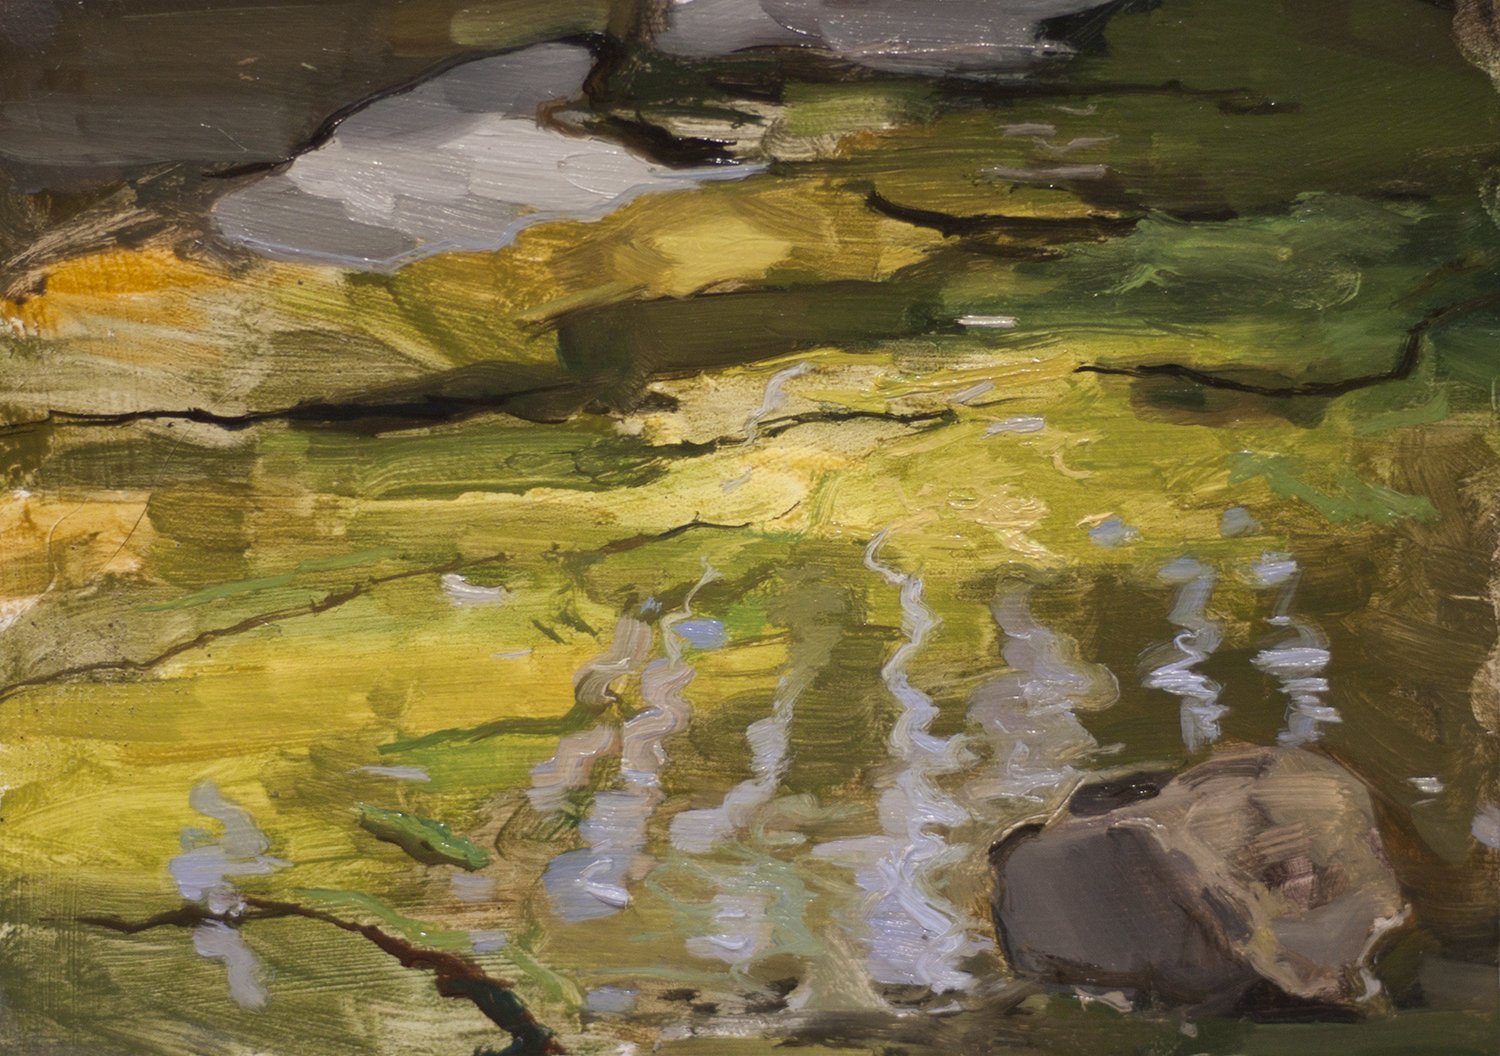  5”x7” oil on panel  Study from Gill Brook Trail  2021  NFS 